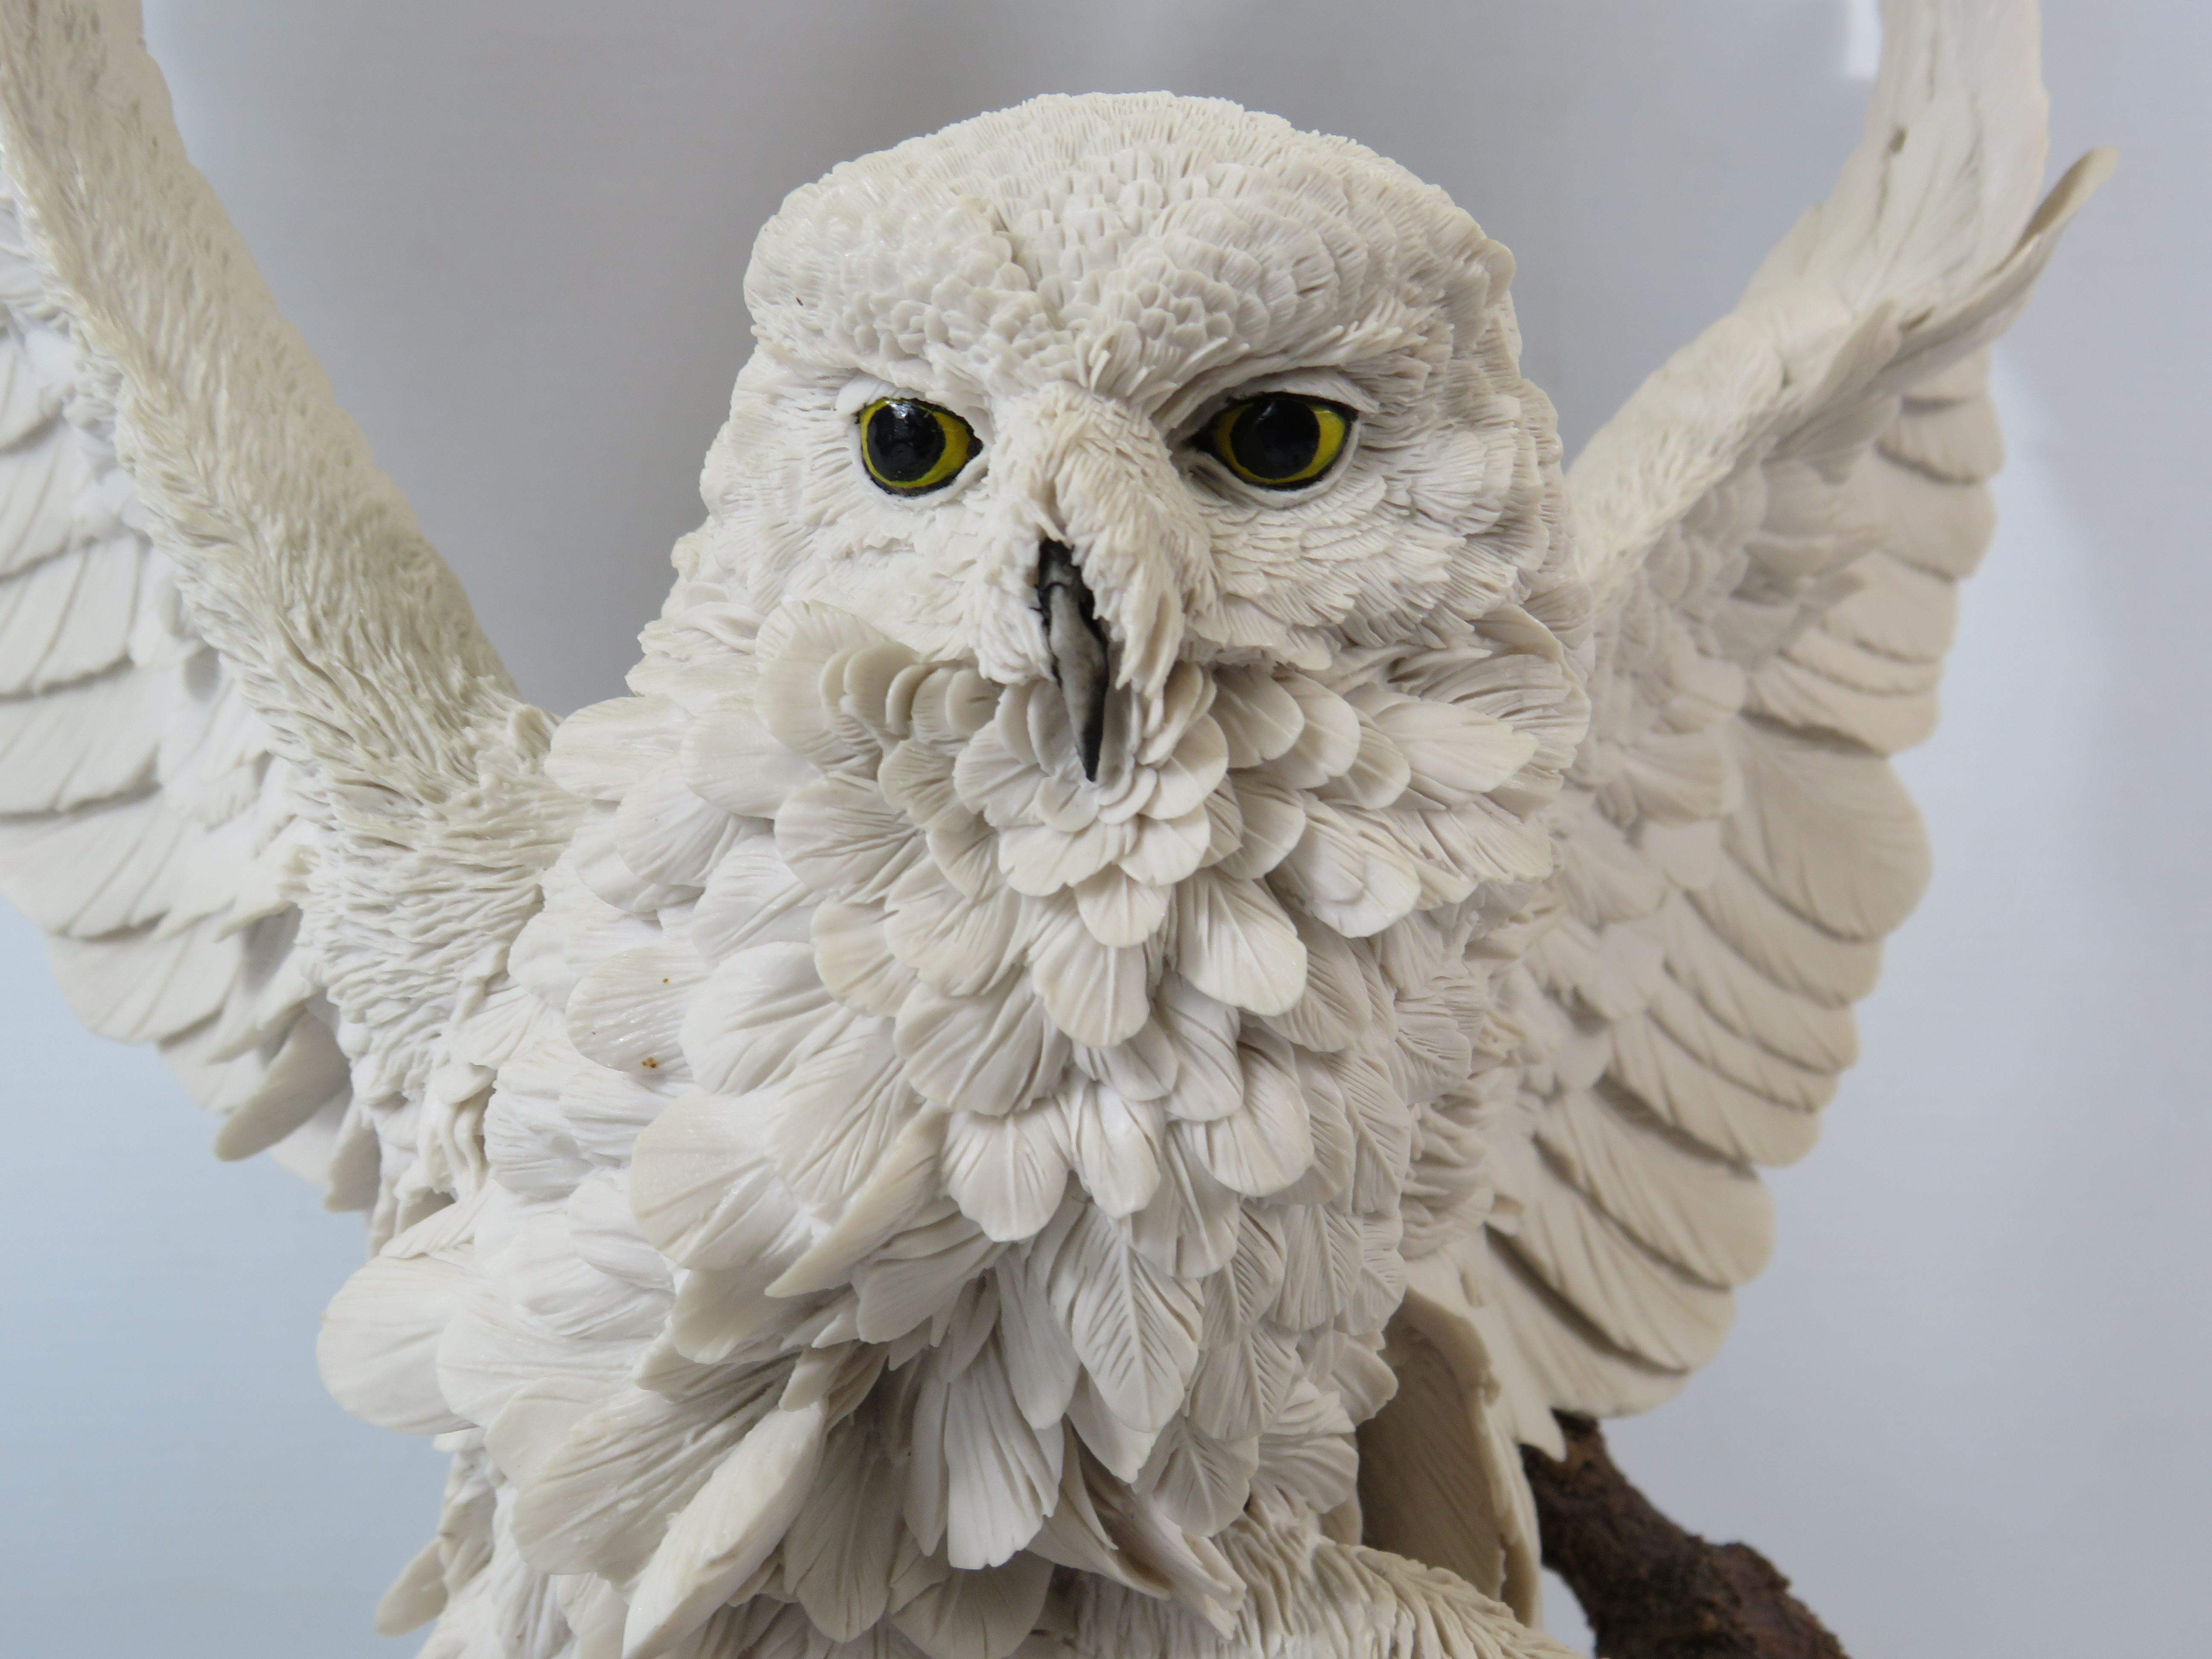 Large Country Artist limited edition sculpture of an Owl "White Splender" No 209 of 350 with cert no - Image 2 of 5